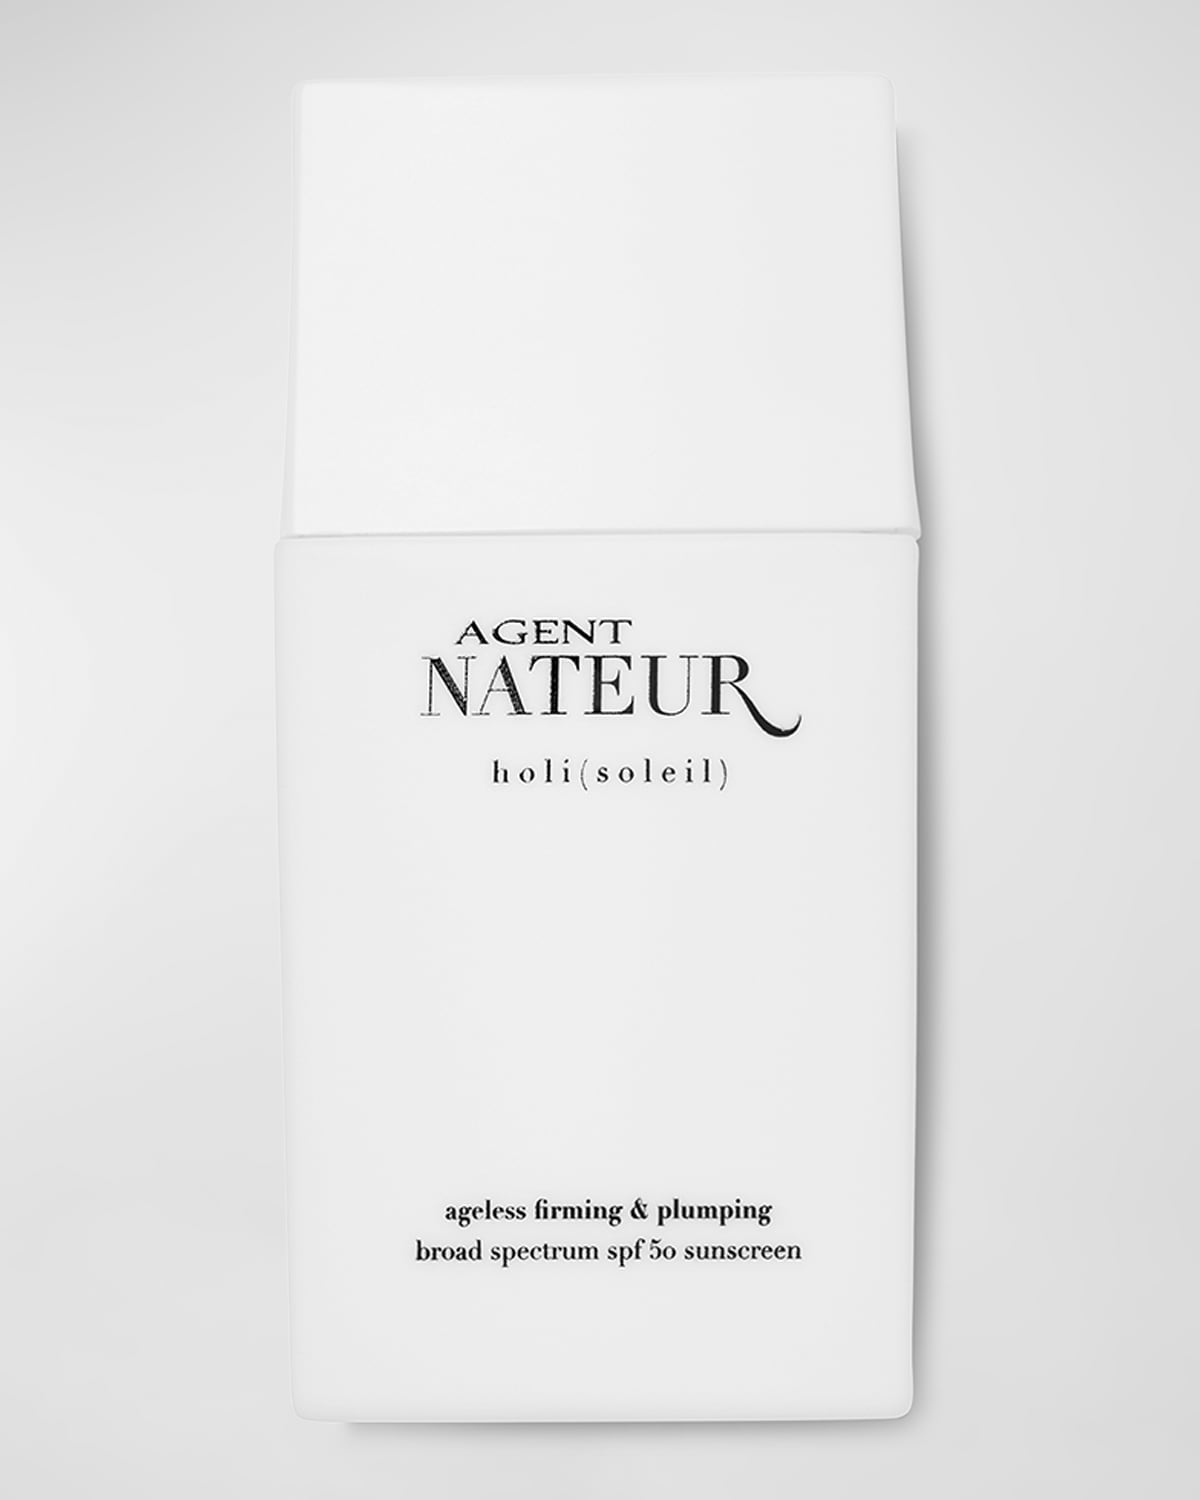 Agent Nateur Holi (soleil) Ageless Firming & Plumping Sunscreen, Spf 50 In White